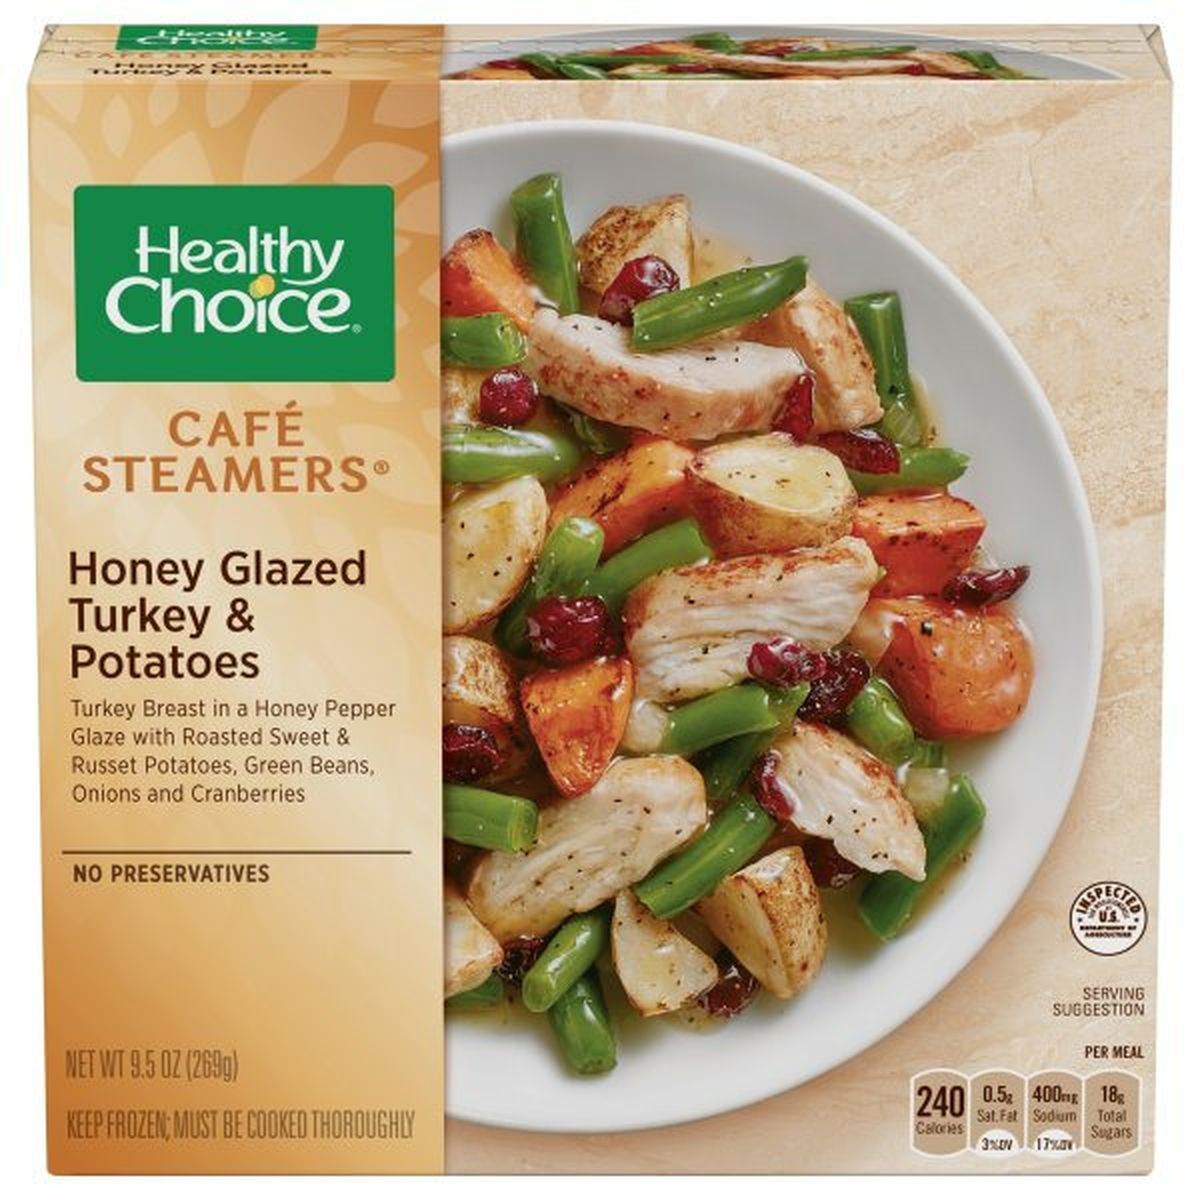 Calories in Healthy Choice Cafe Steamers Honey Glazed Turkey & Potatoes